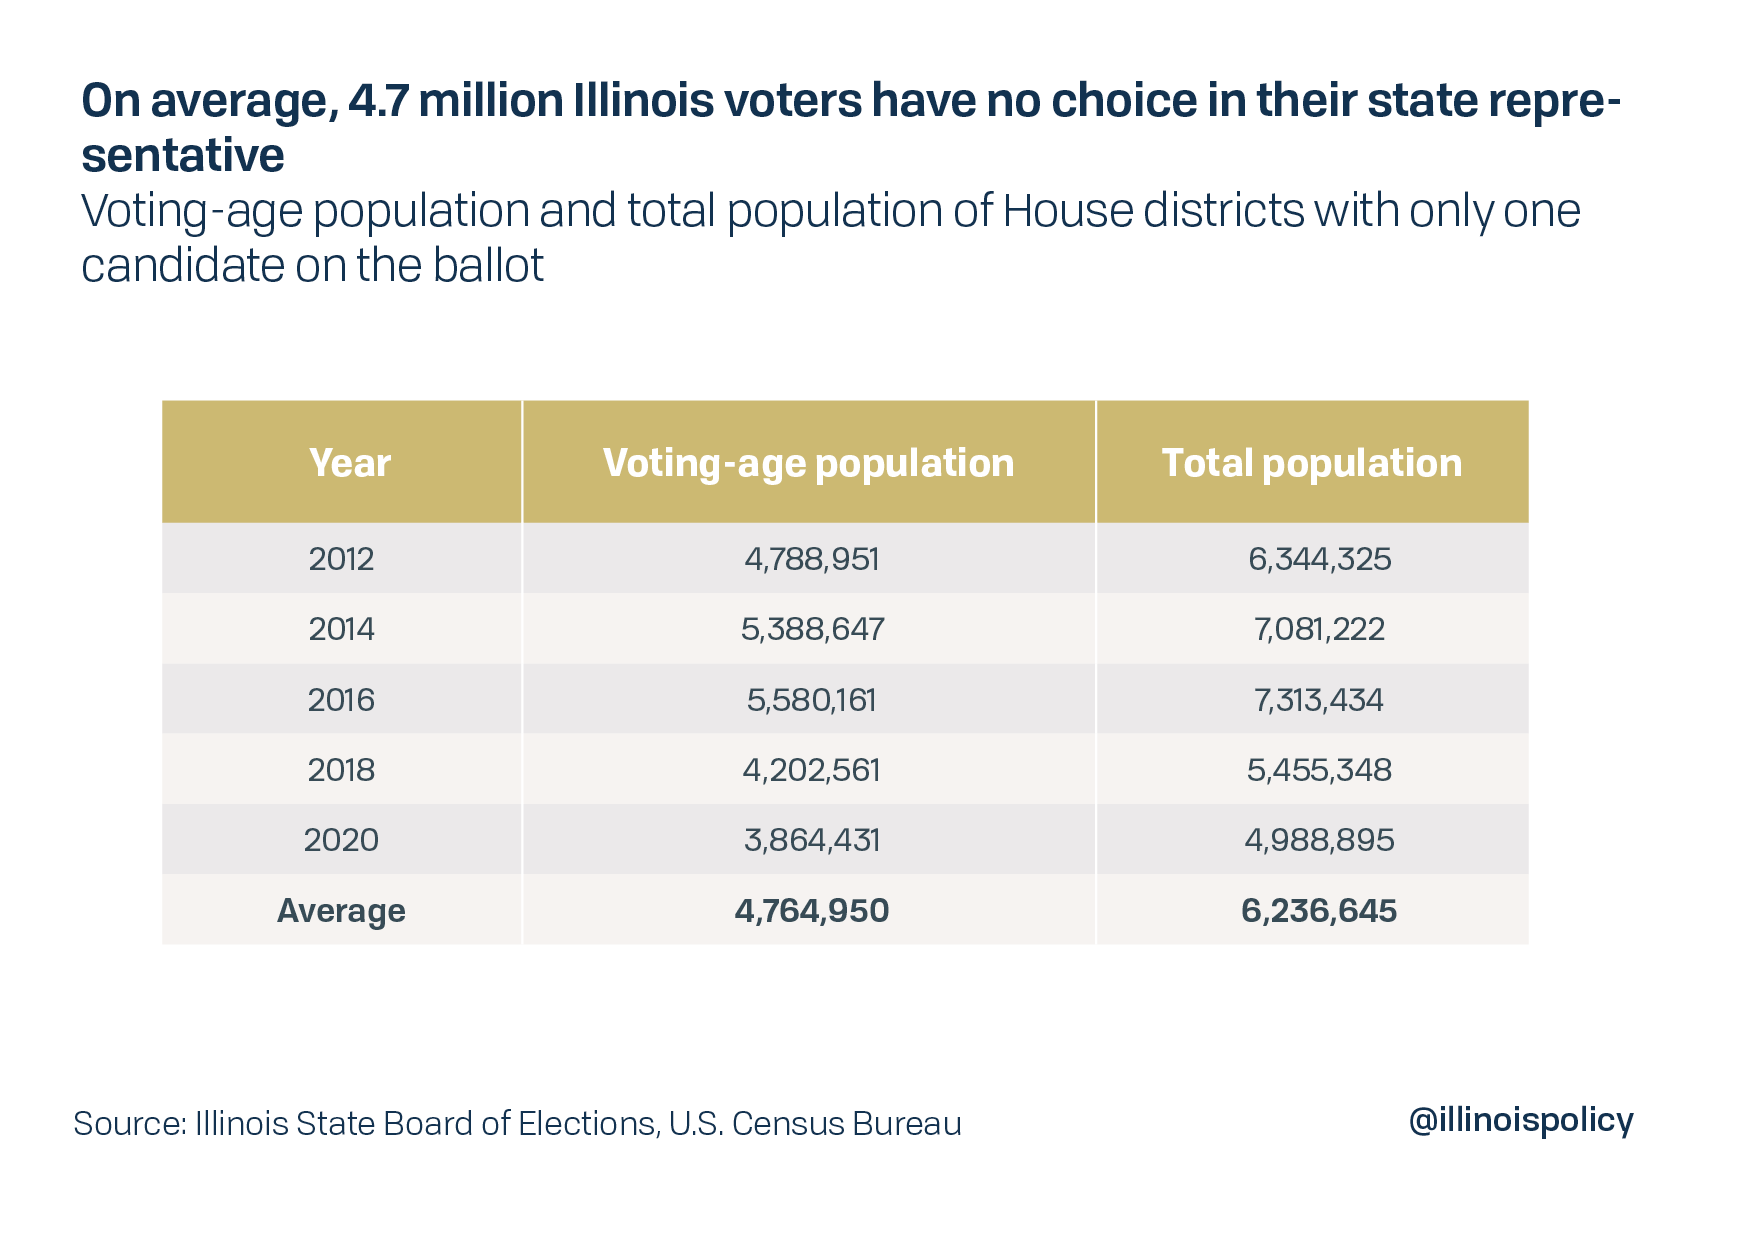 On average, 4.7 million voters have no choice in their state representative